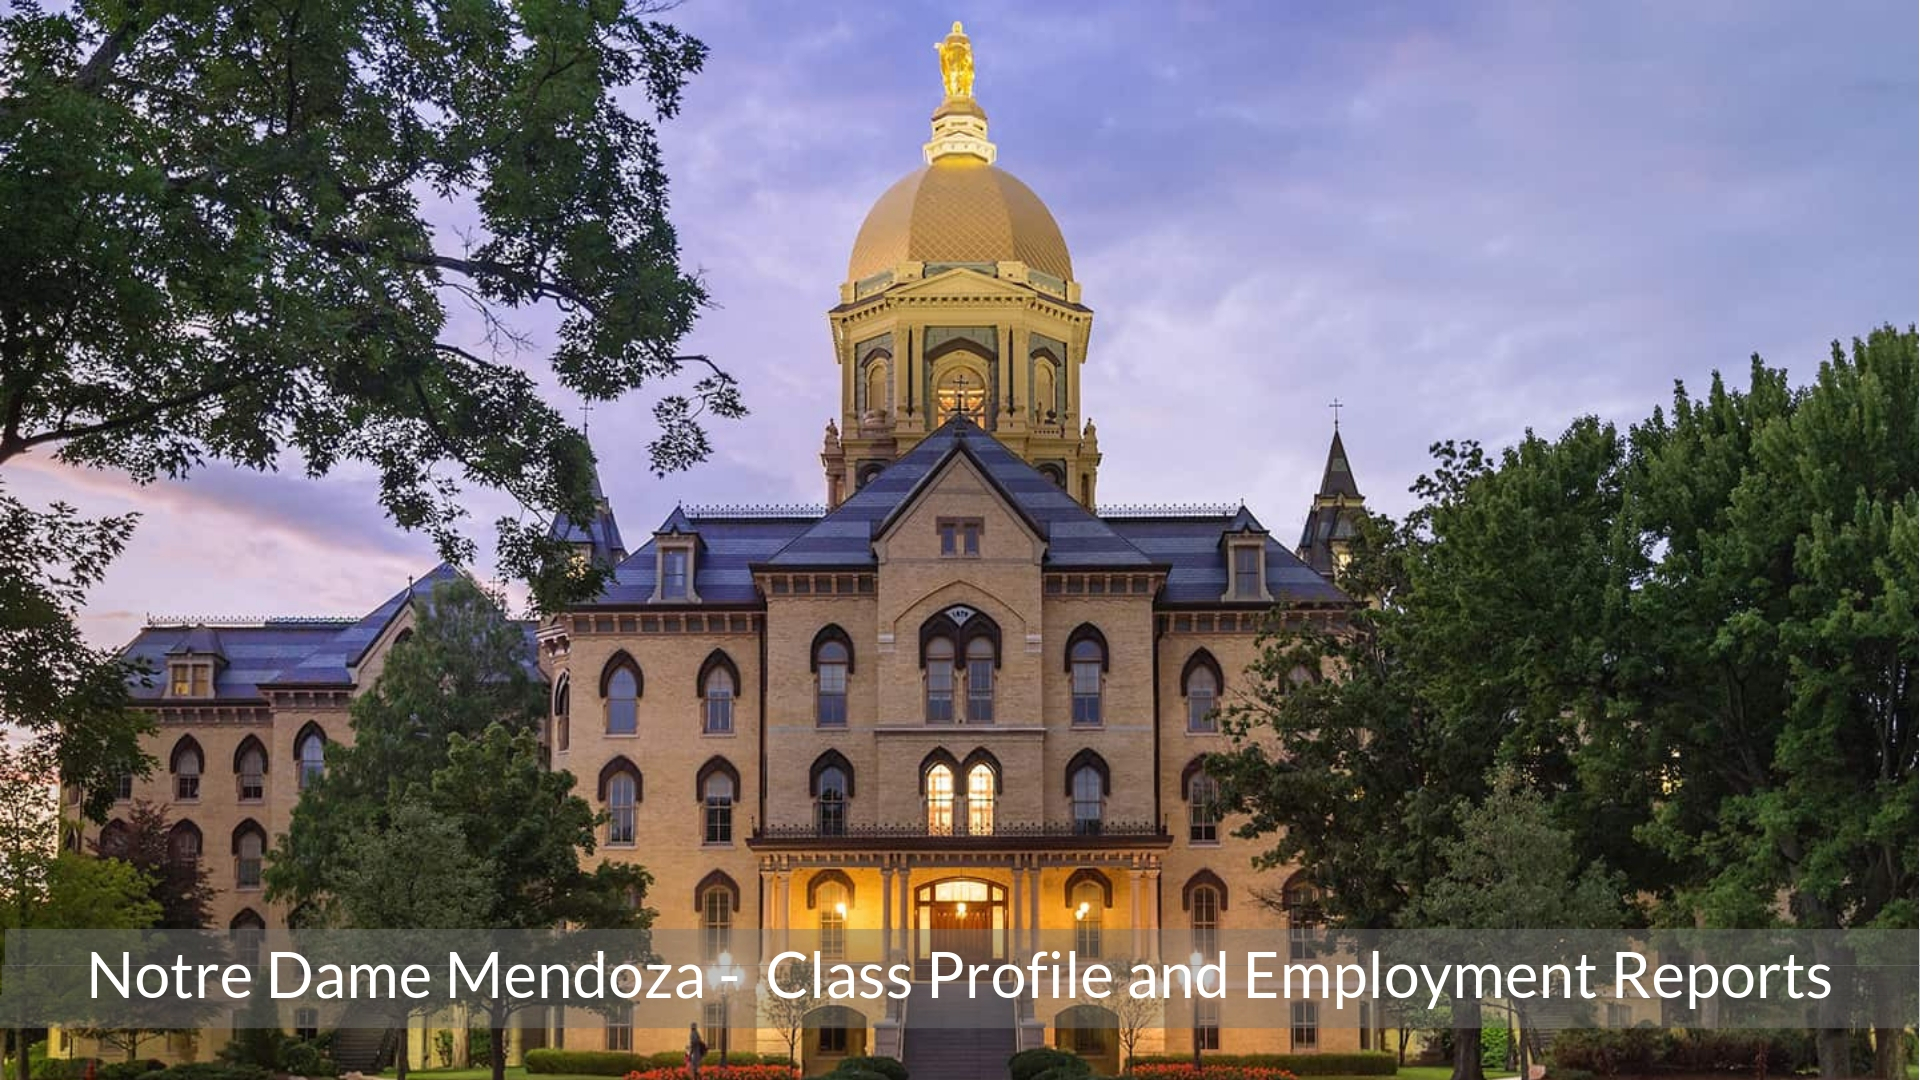 Notre Dame Mendoza College of Business MBA Program - Class Profile, Career and Employment Outcomes (1)